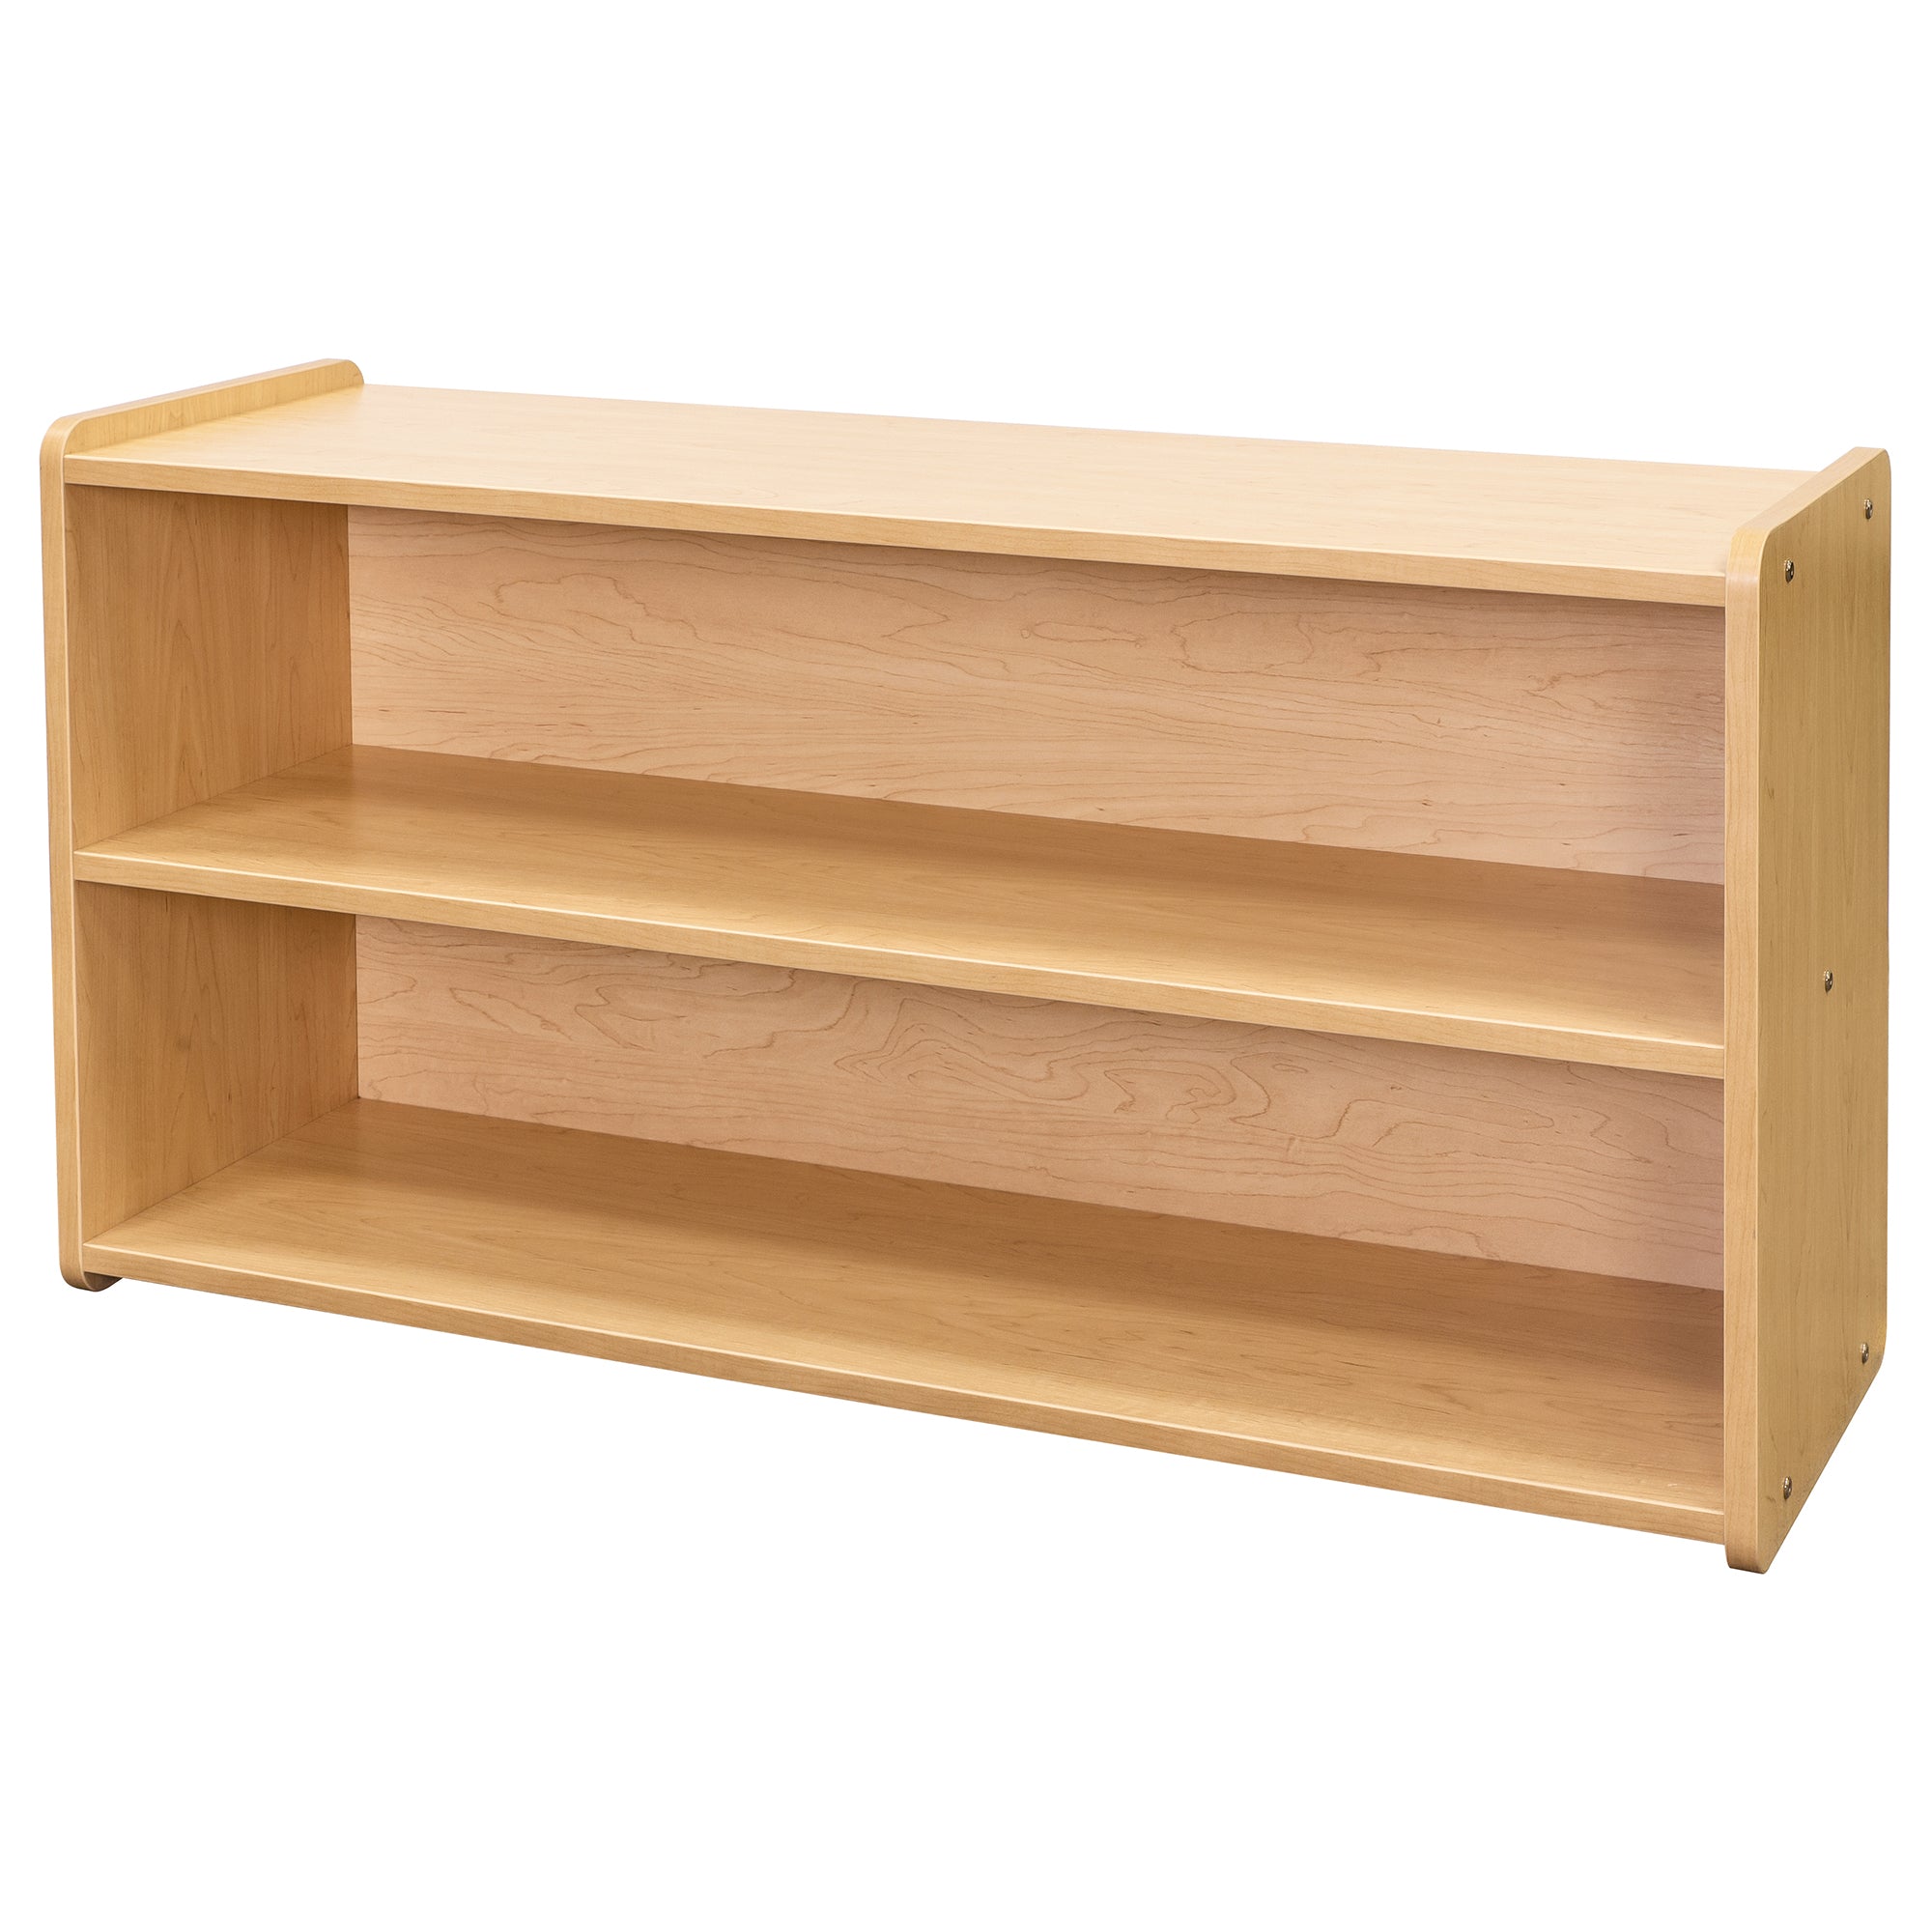 MyPerfectClassroom Toddler 2-Shelf Storage with Clear Back (Item #Mpc4008)